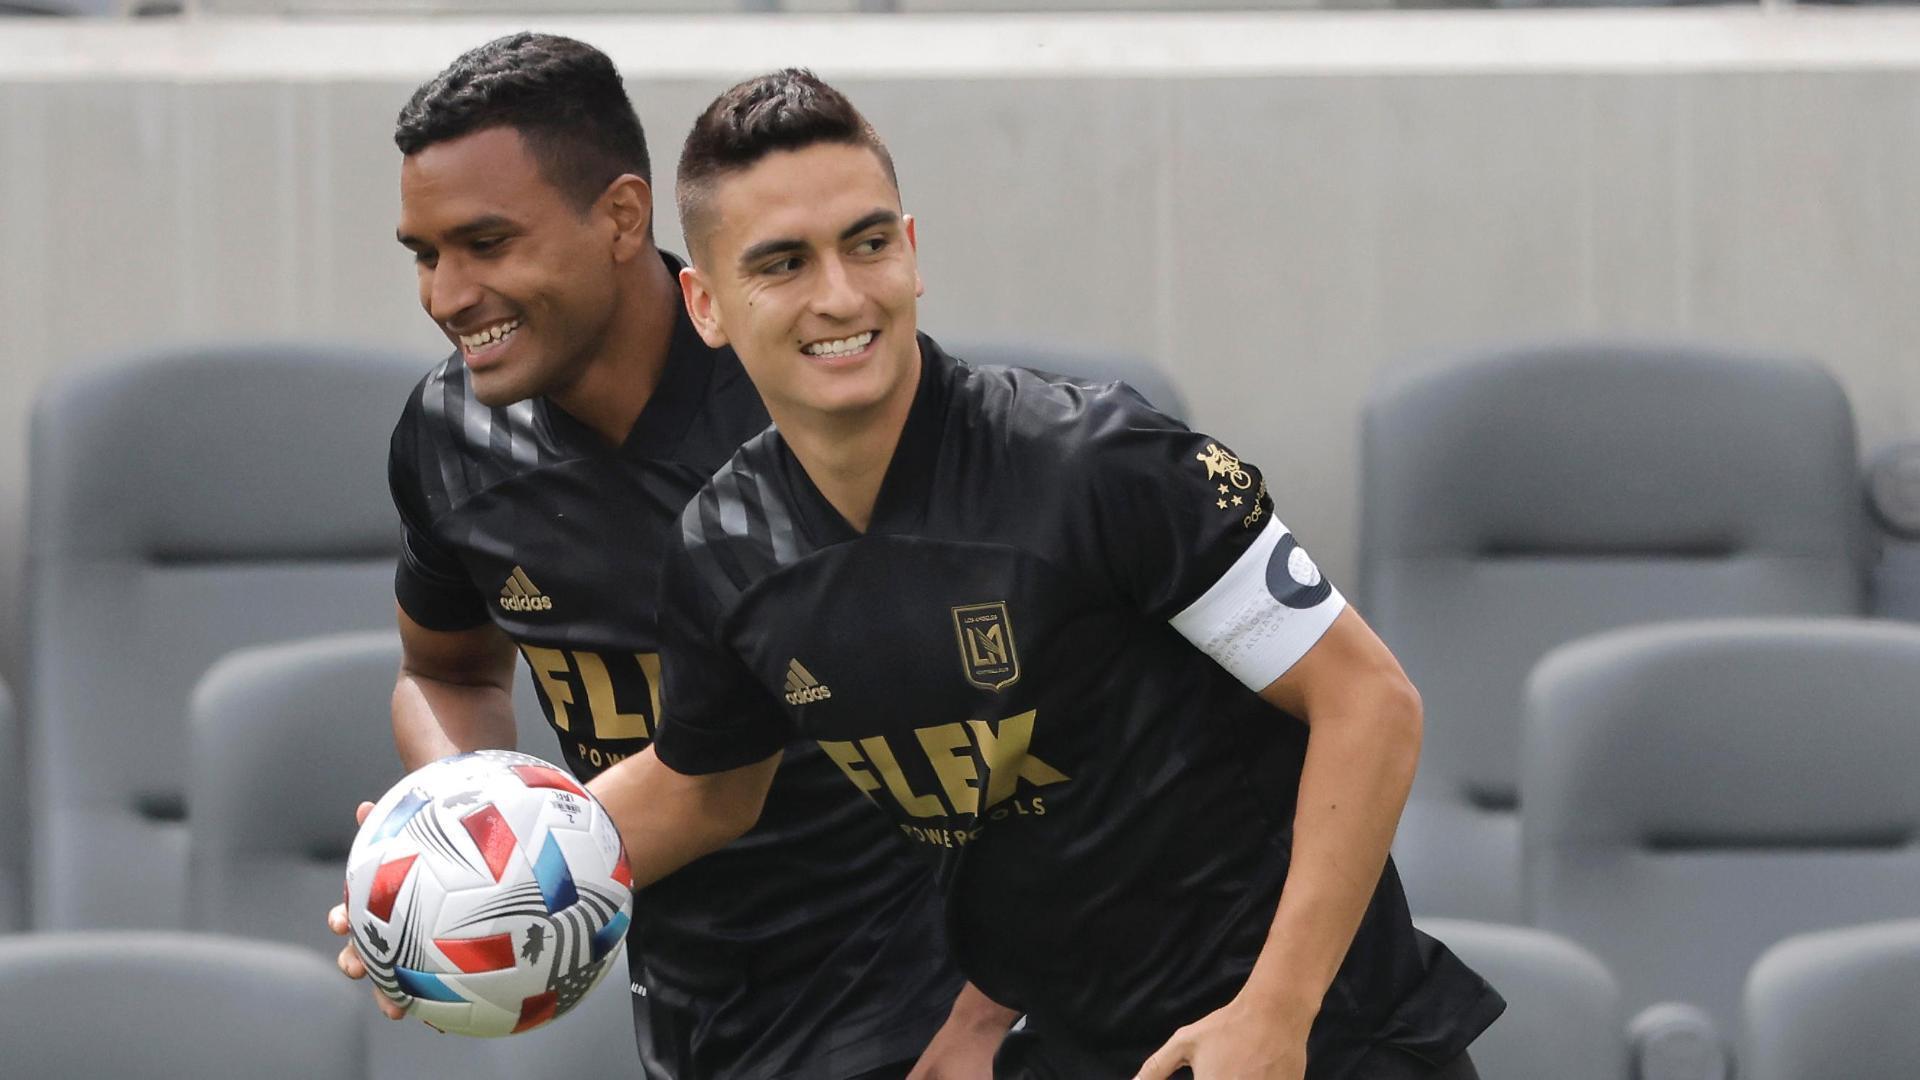 LAFC scores on a free kick under the wall